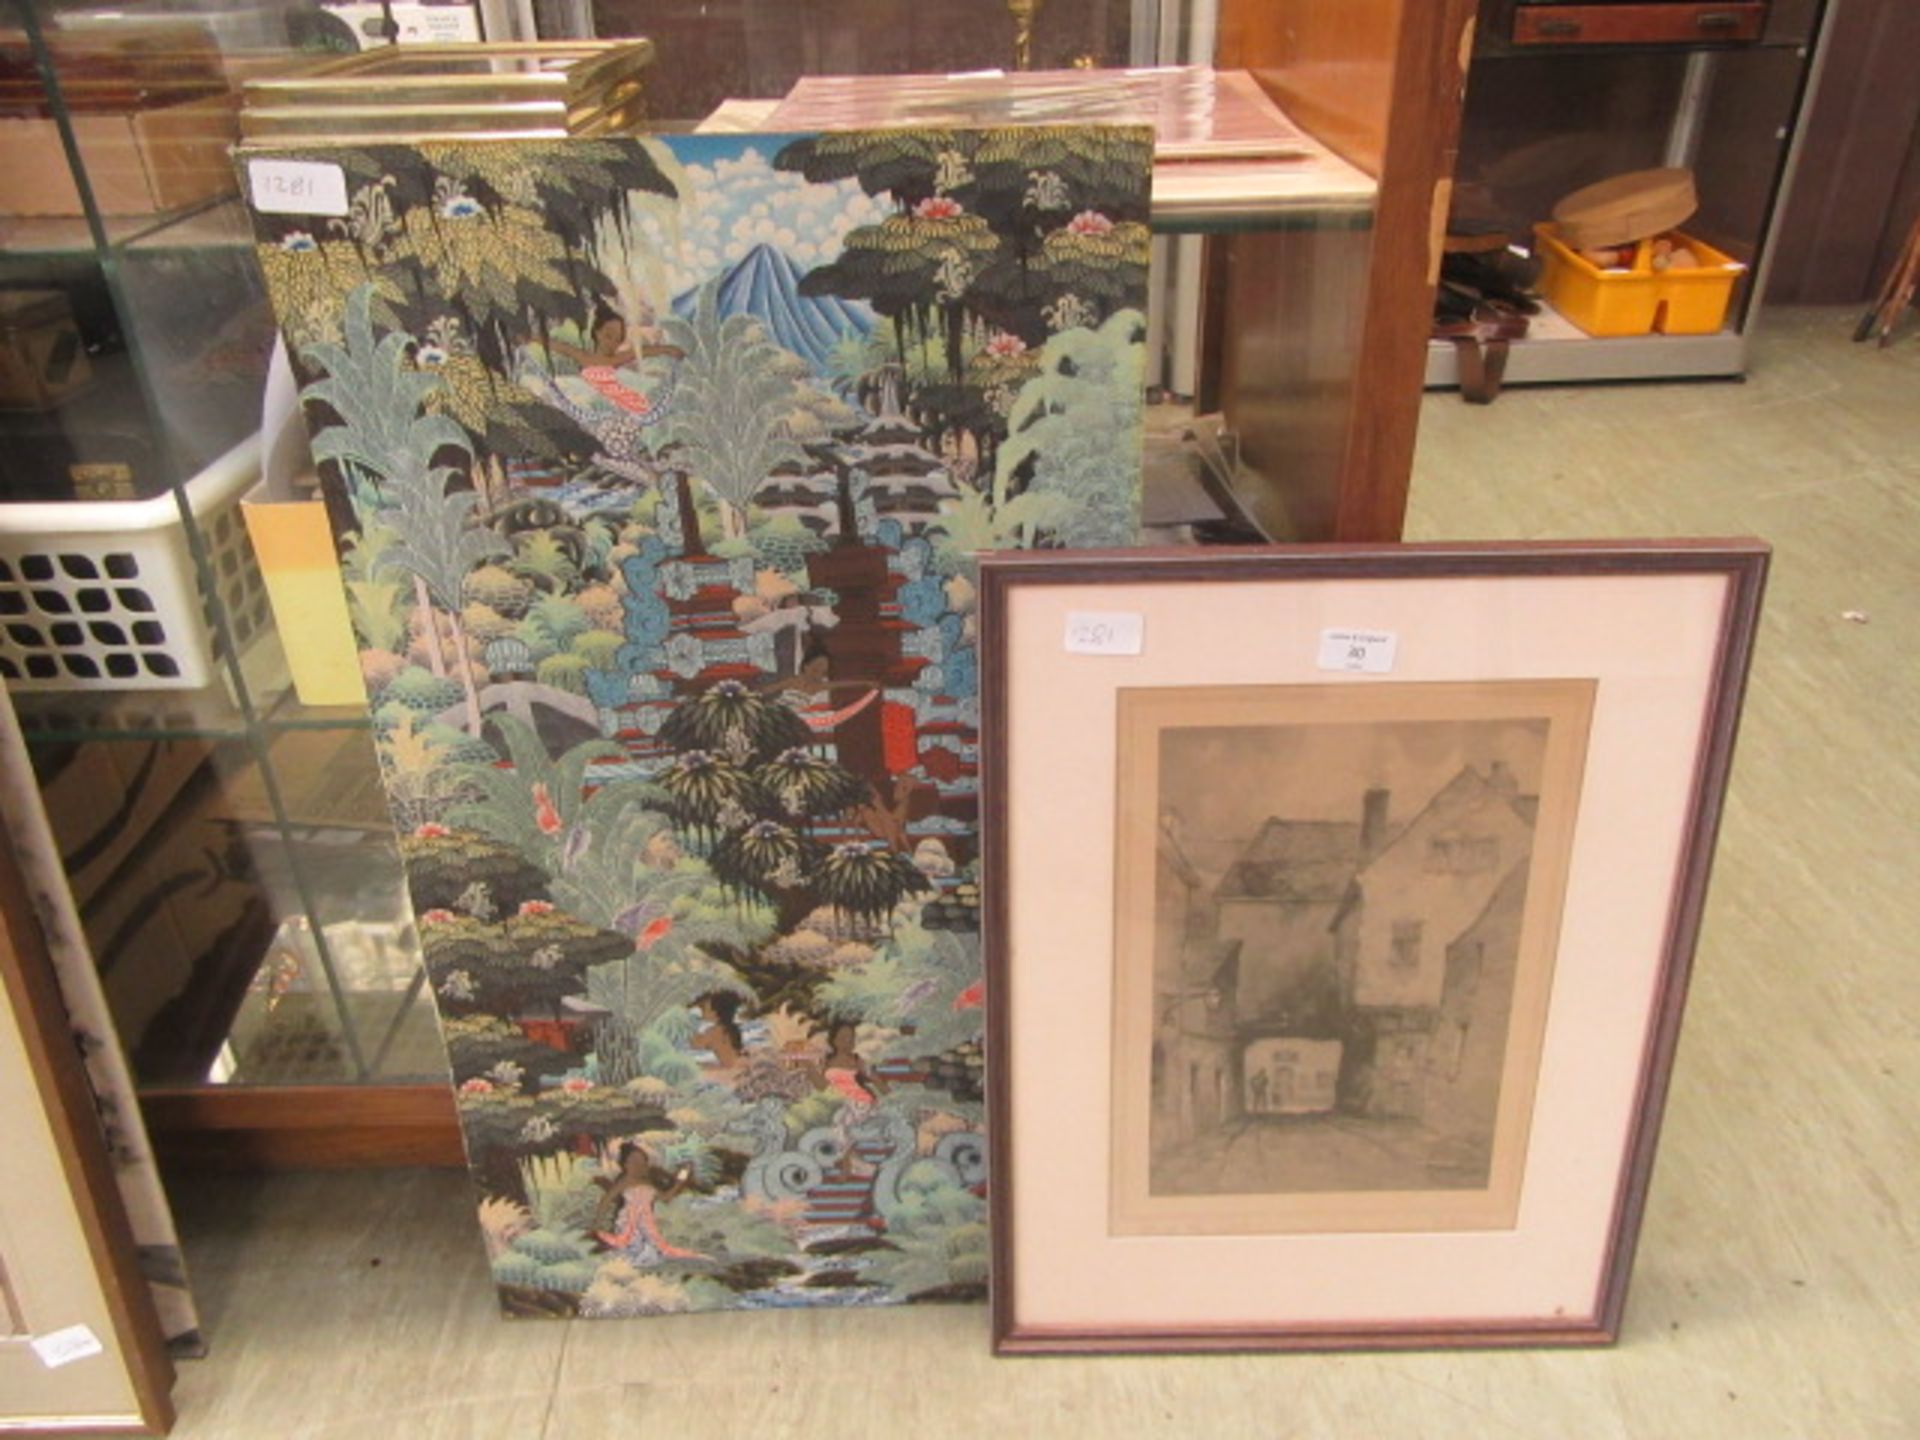 A framed and glazed etching signed Robson along with an eastern painting